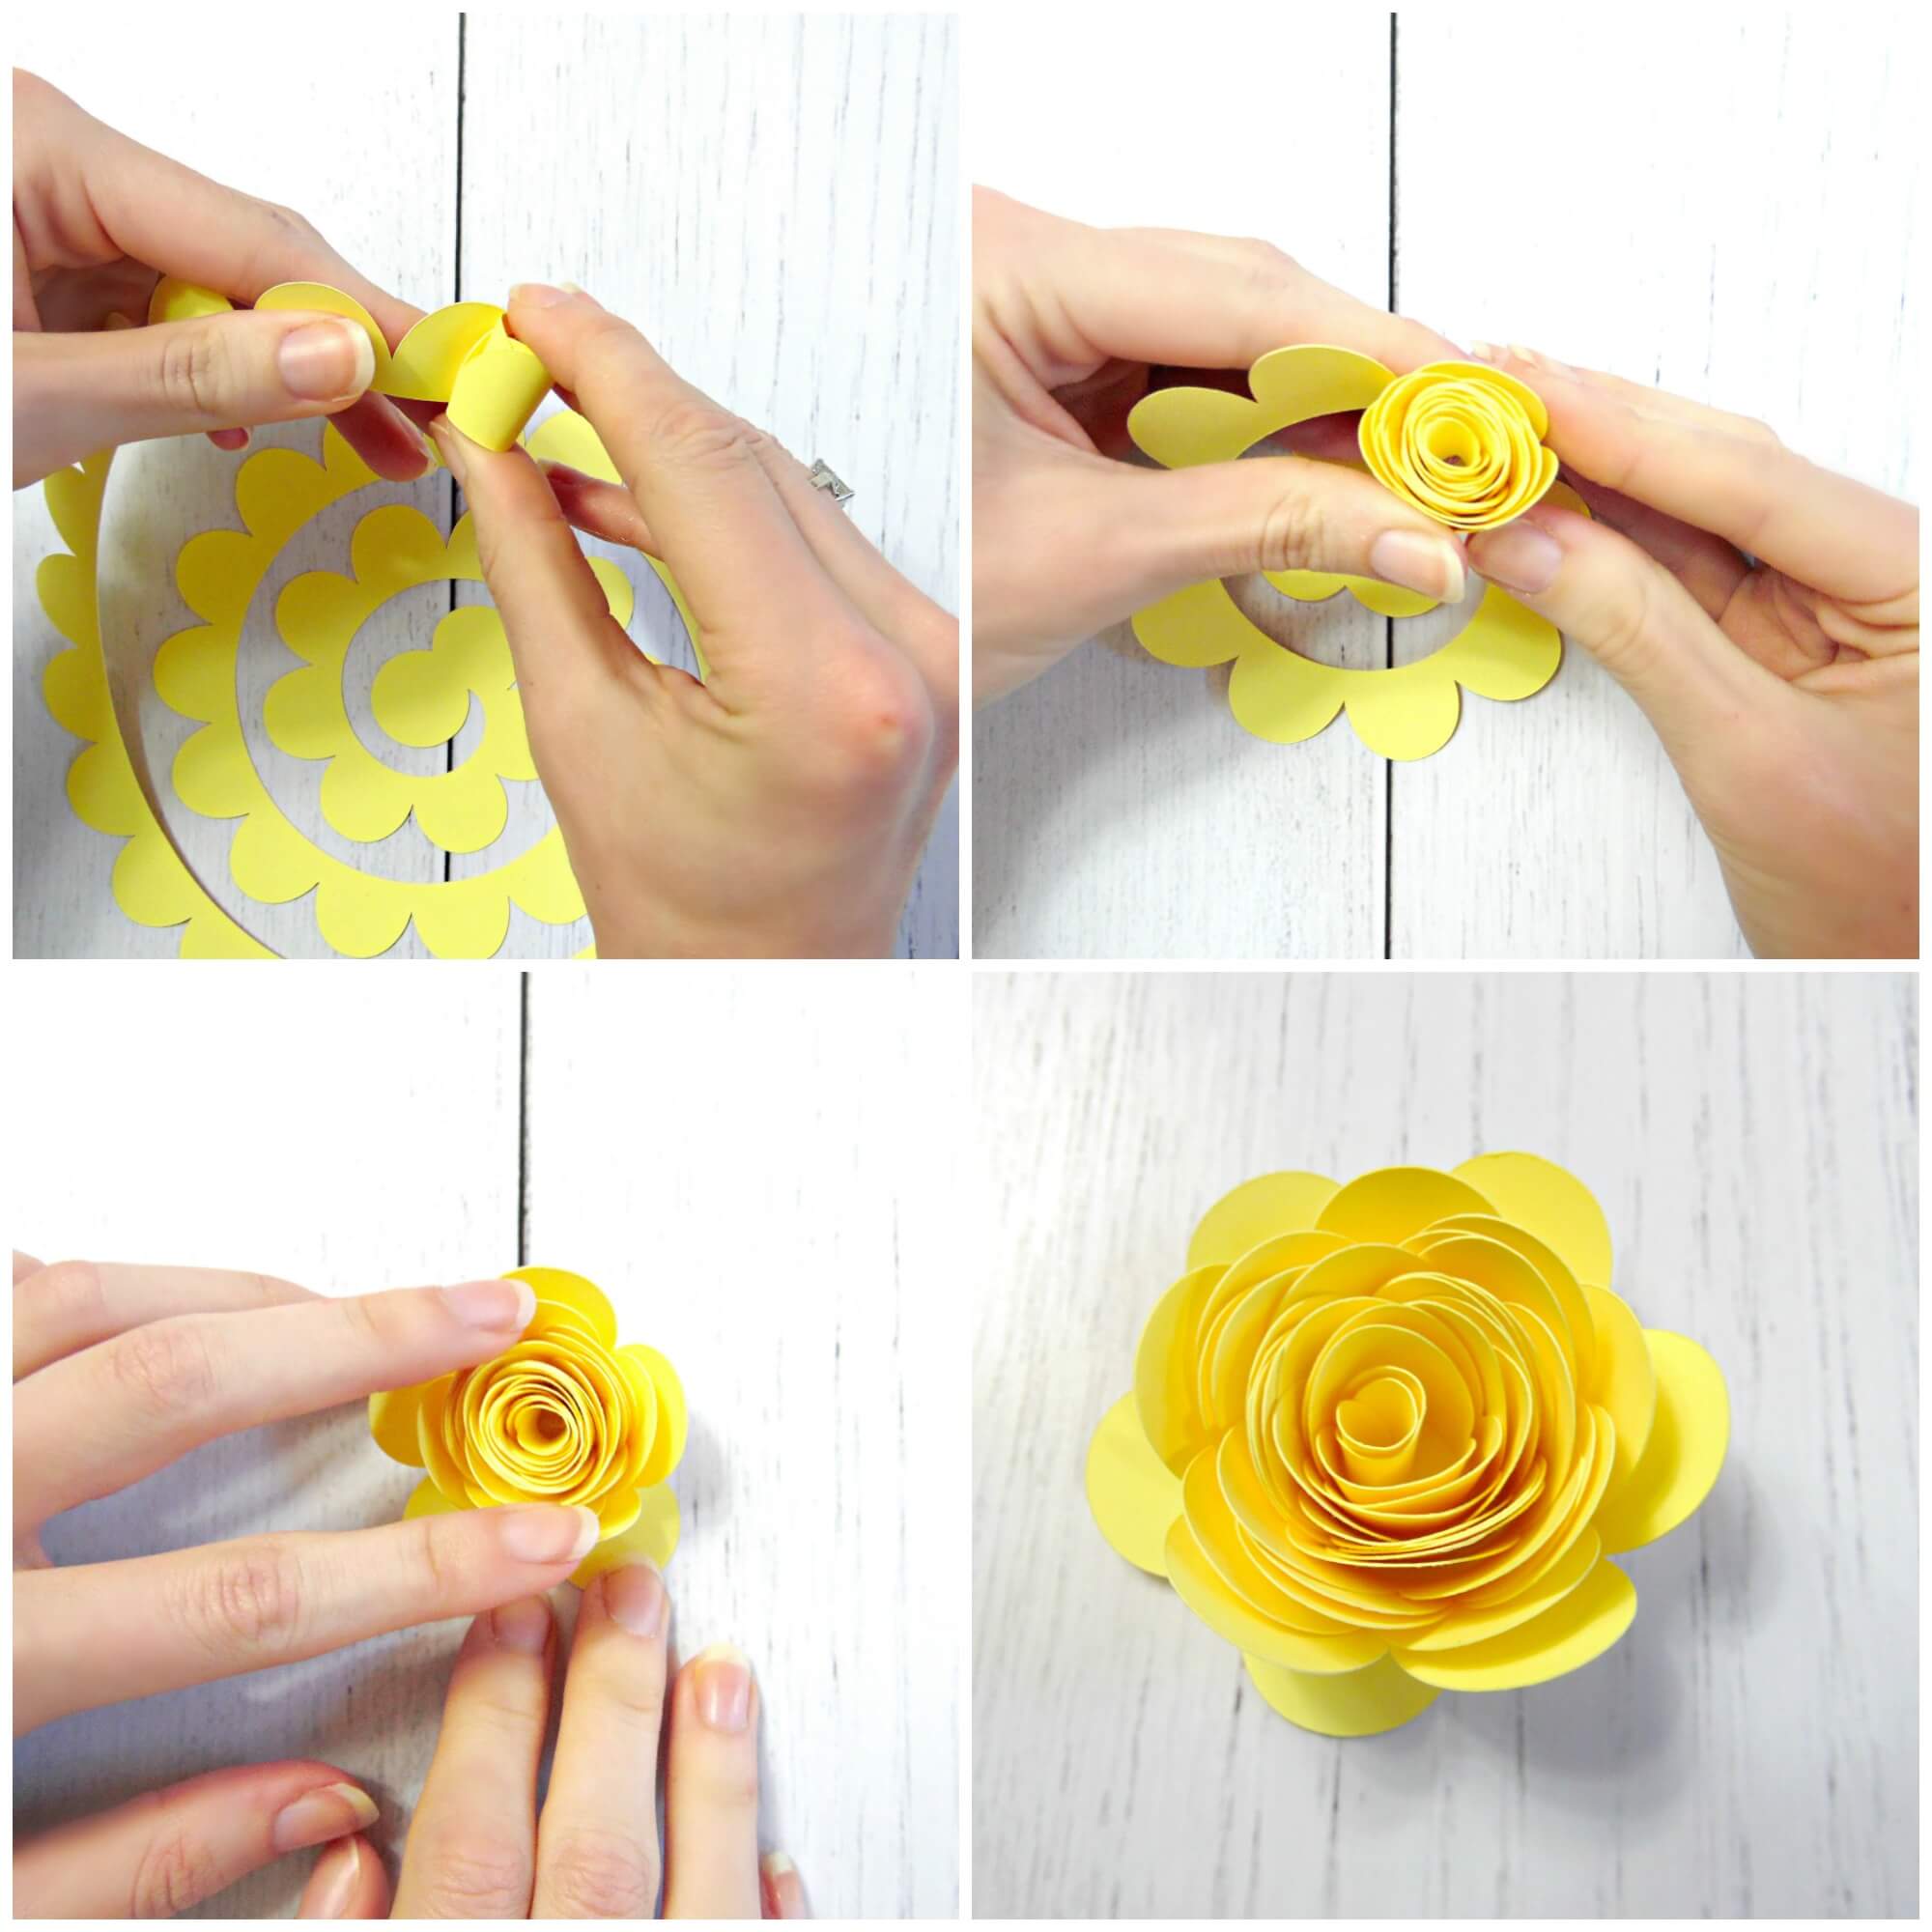 A collage of four images showing a woman rolling a strand of yellow paper to create a small rosette, which will be the center of the Charlotte rose.